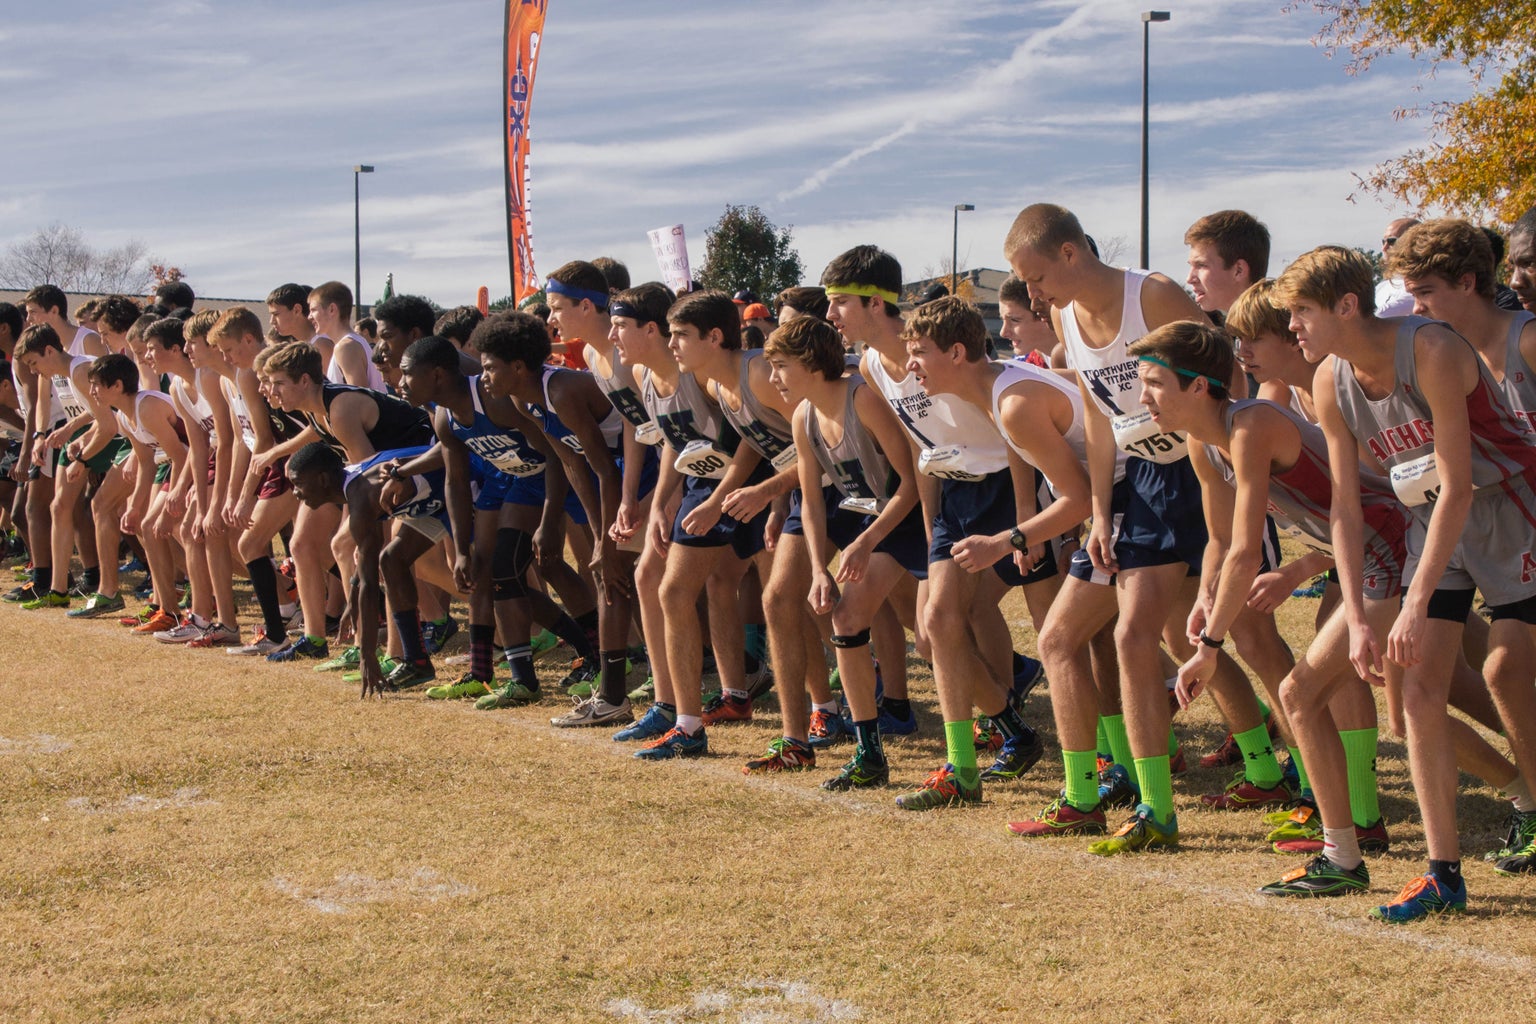 Sports Cross Country Starting Line